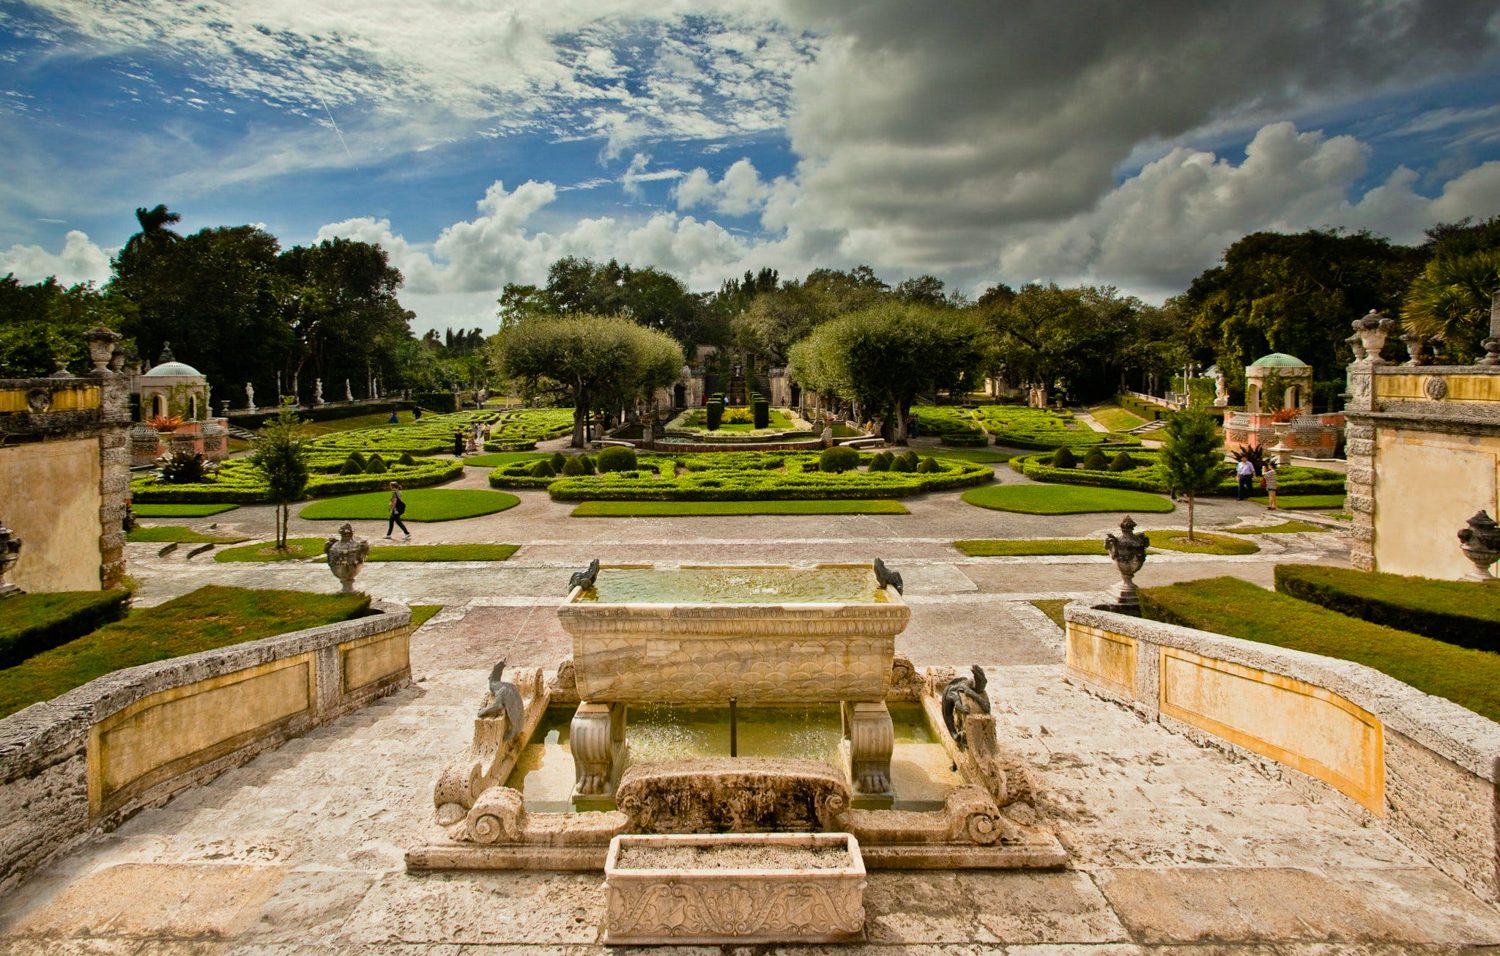 An ornate garden with a fountain in the middle, offering endless photography opportunities for top Miami wedding venues.